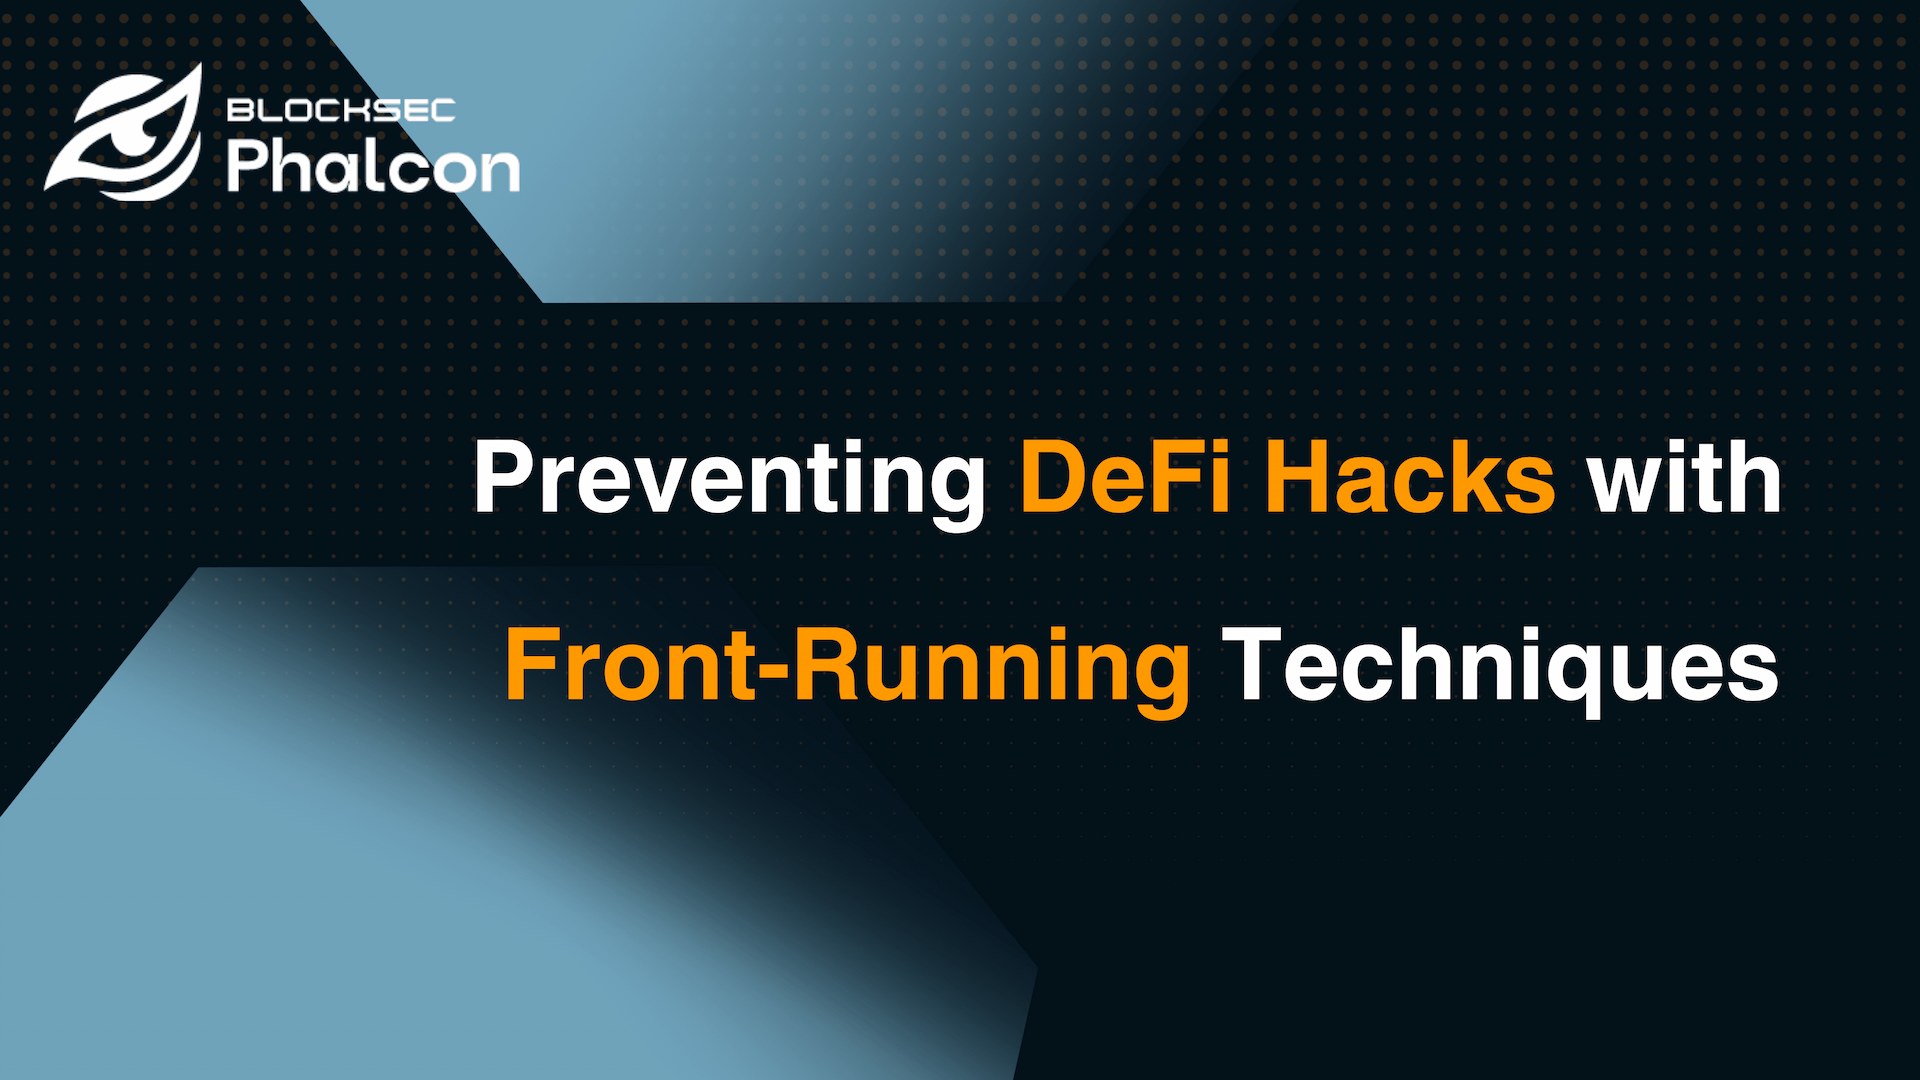 How Can BlockSec Phalcon Prevent Hacker Attacks on DeFi Protocols by Using Front-Running Techniques?